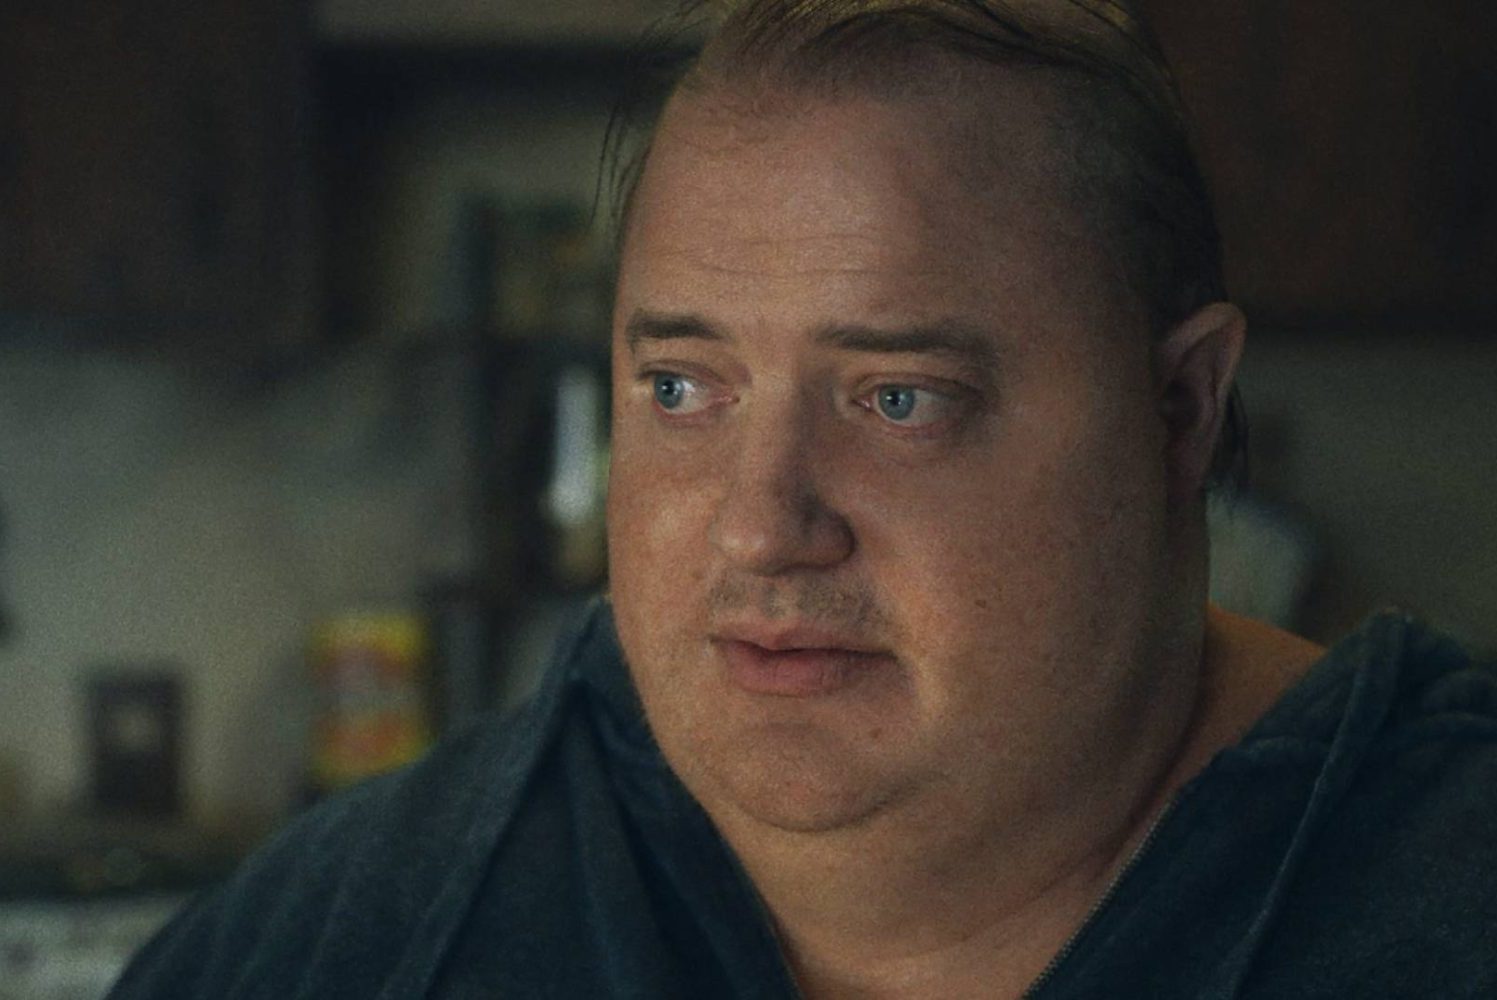 A screenshot of Brendan Fraser from "The Whale"